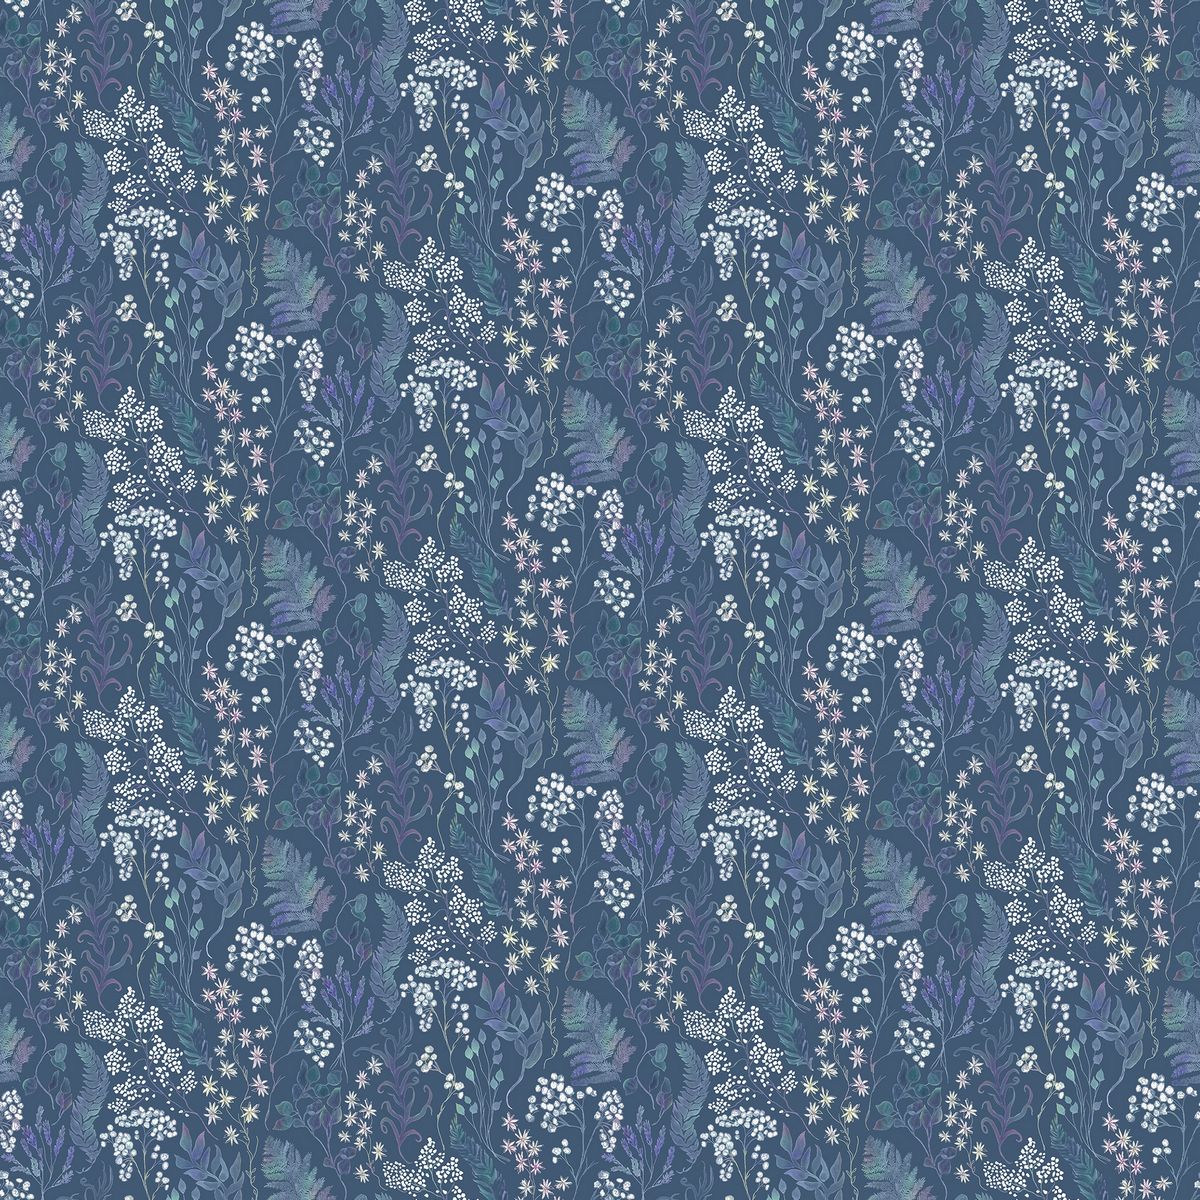 Aileana River Fabric by Voyage Maison